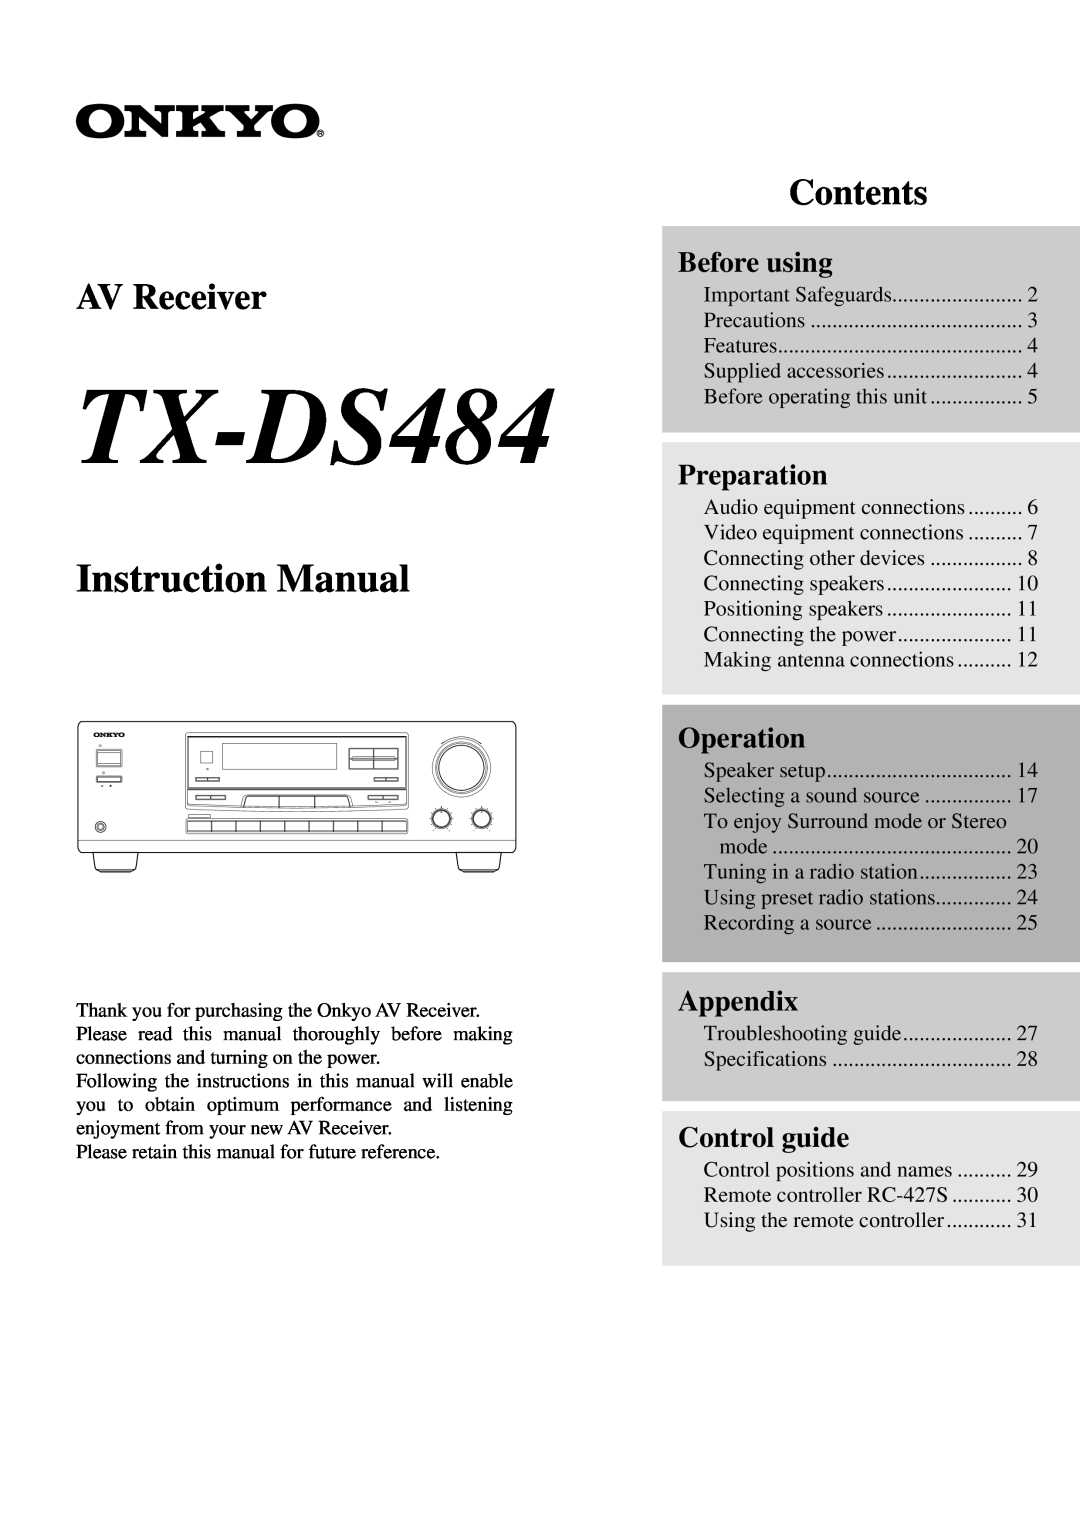 Onkyo TX-DS484 instruction manual Before using, Preparation, Operation, Appendix, Control guide, AV Receiver, Contents 